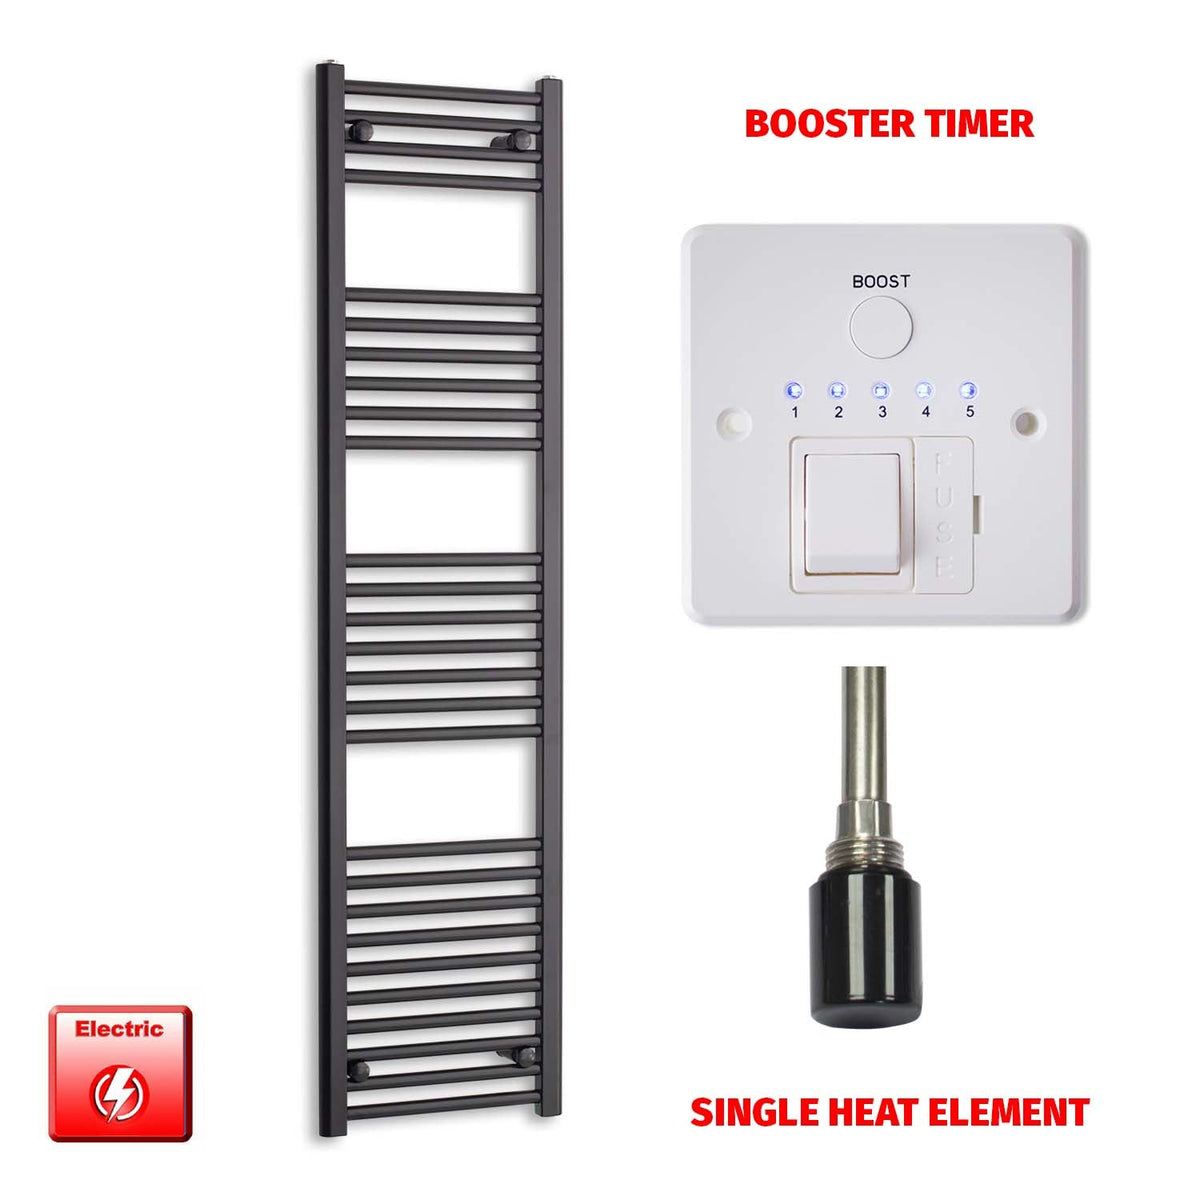 1600 x 400 Flat Black Pre-Filled Electric Heated Towel Radiator HTR Single Booster Timer